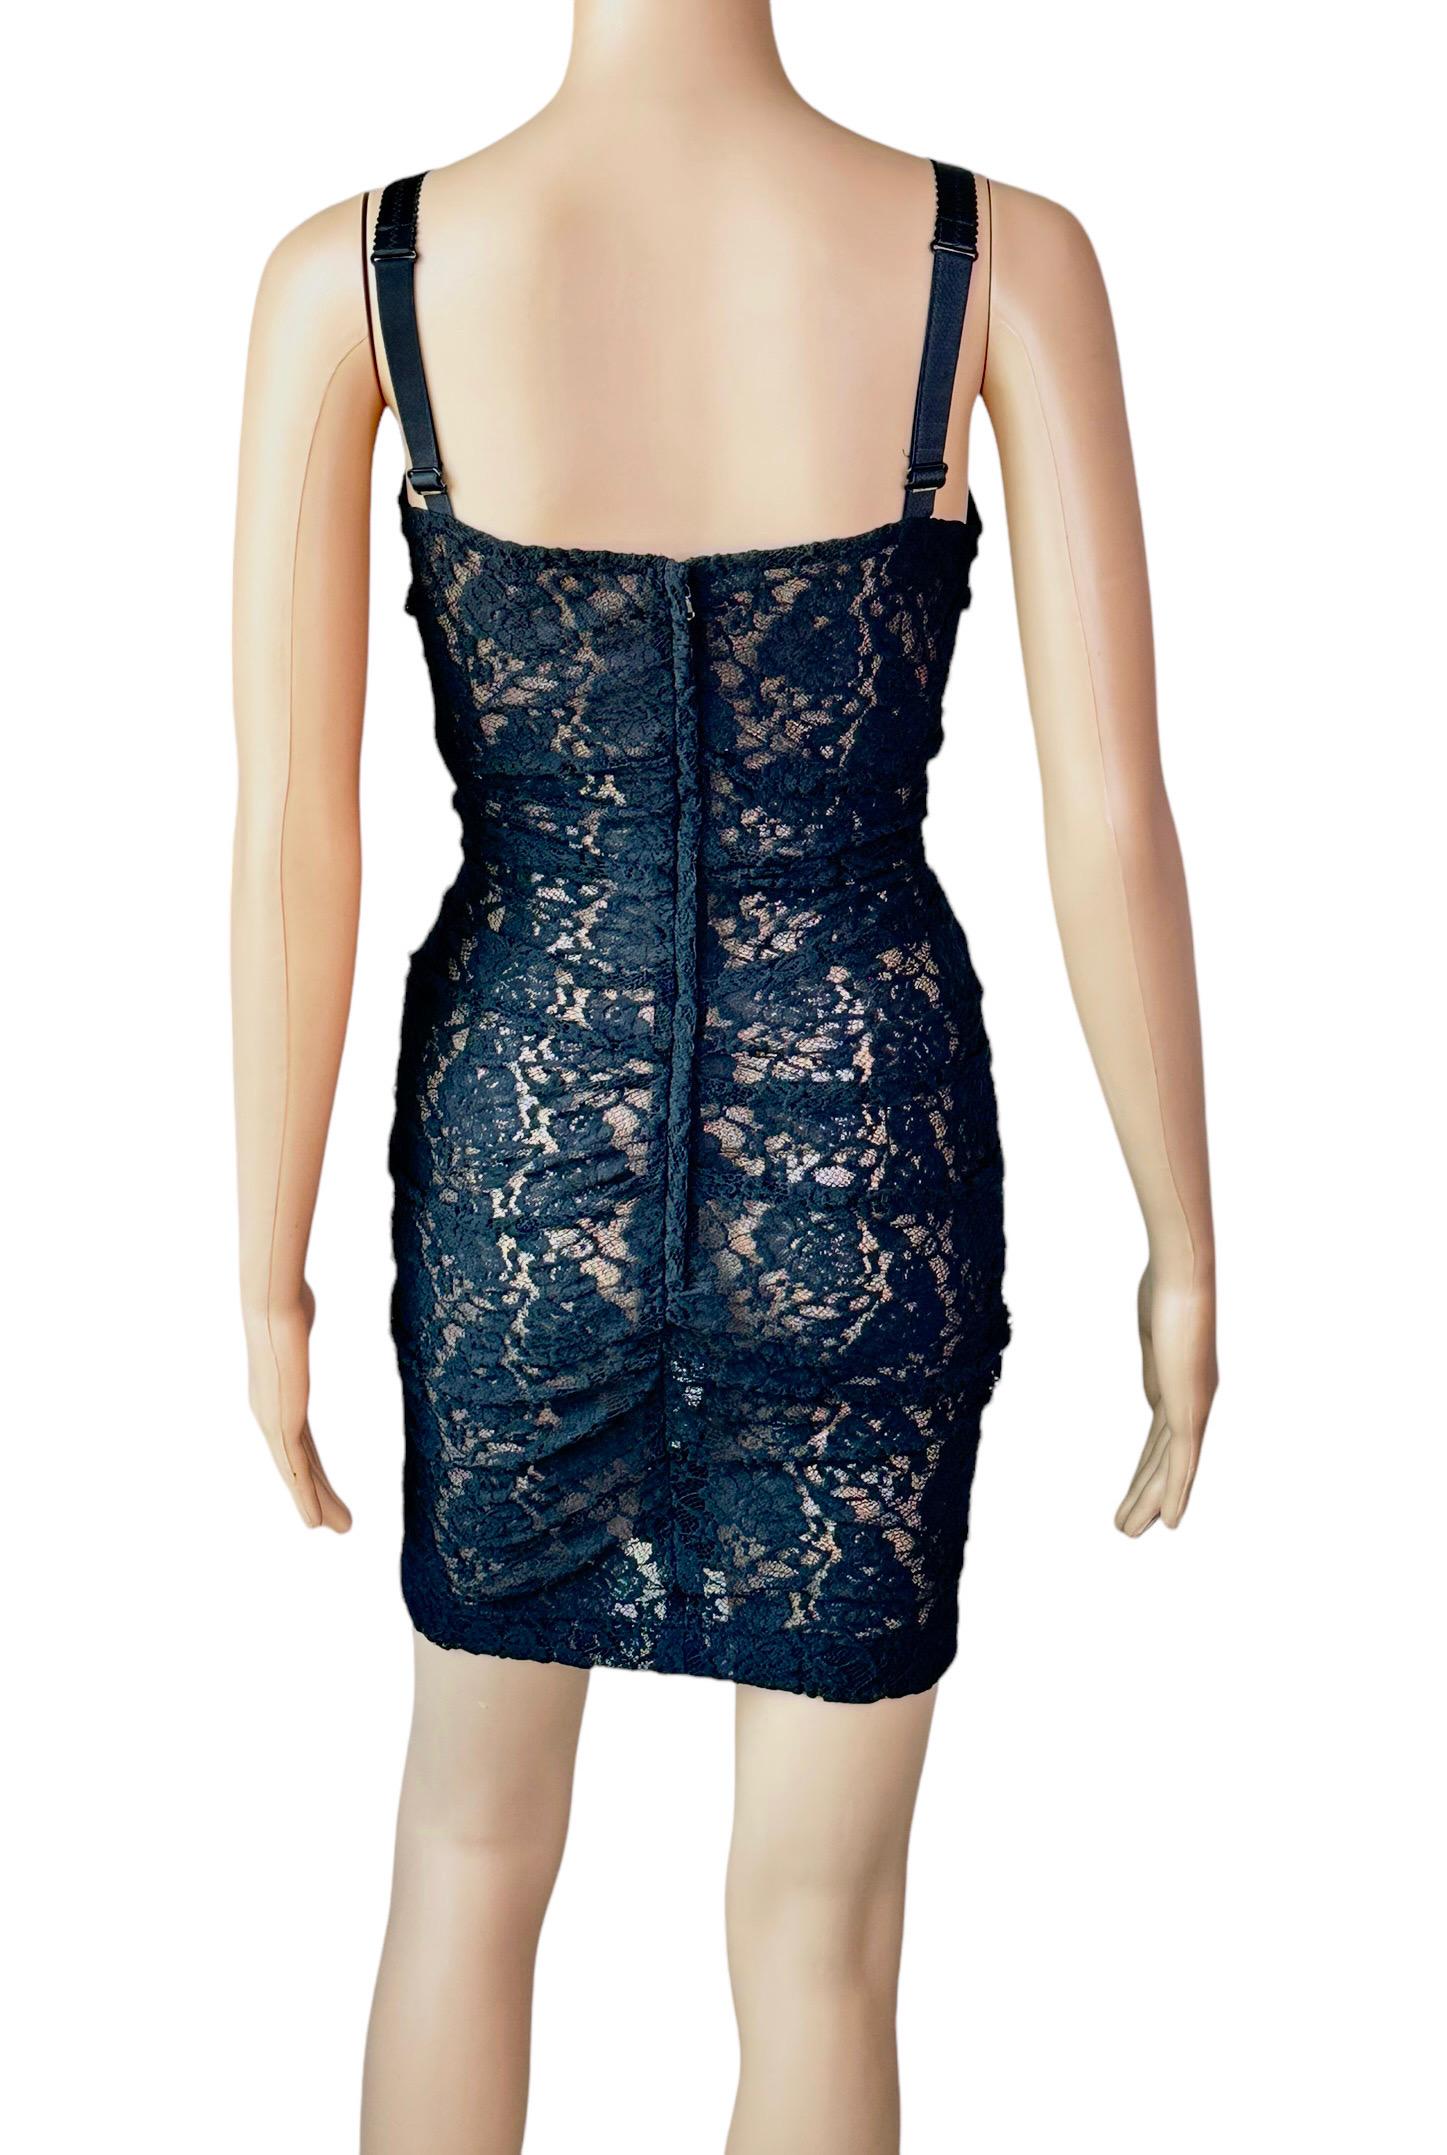 Dolce & Gabbana Lace Up Bustier Sheer Lace Crochet Bodycon Black Mini Dress In Good Condition For Sale In Naples, FL